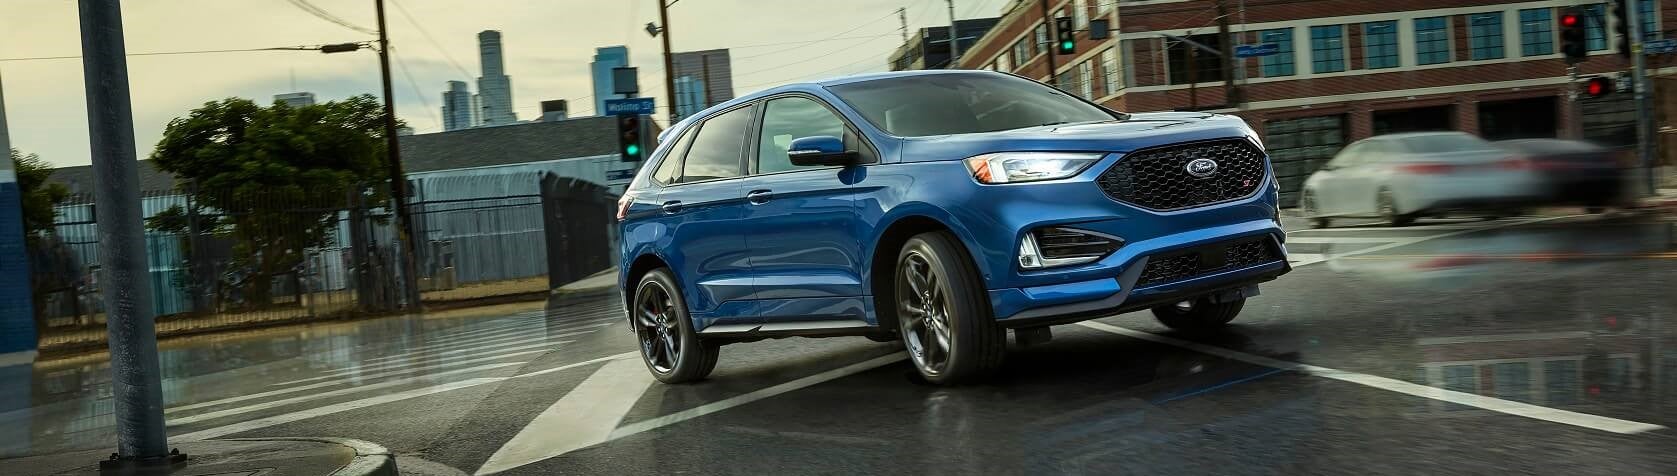 Used Ford Edge for Sale near Me